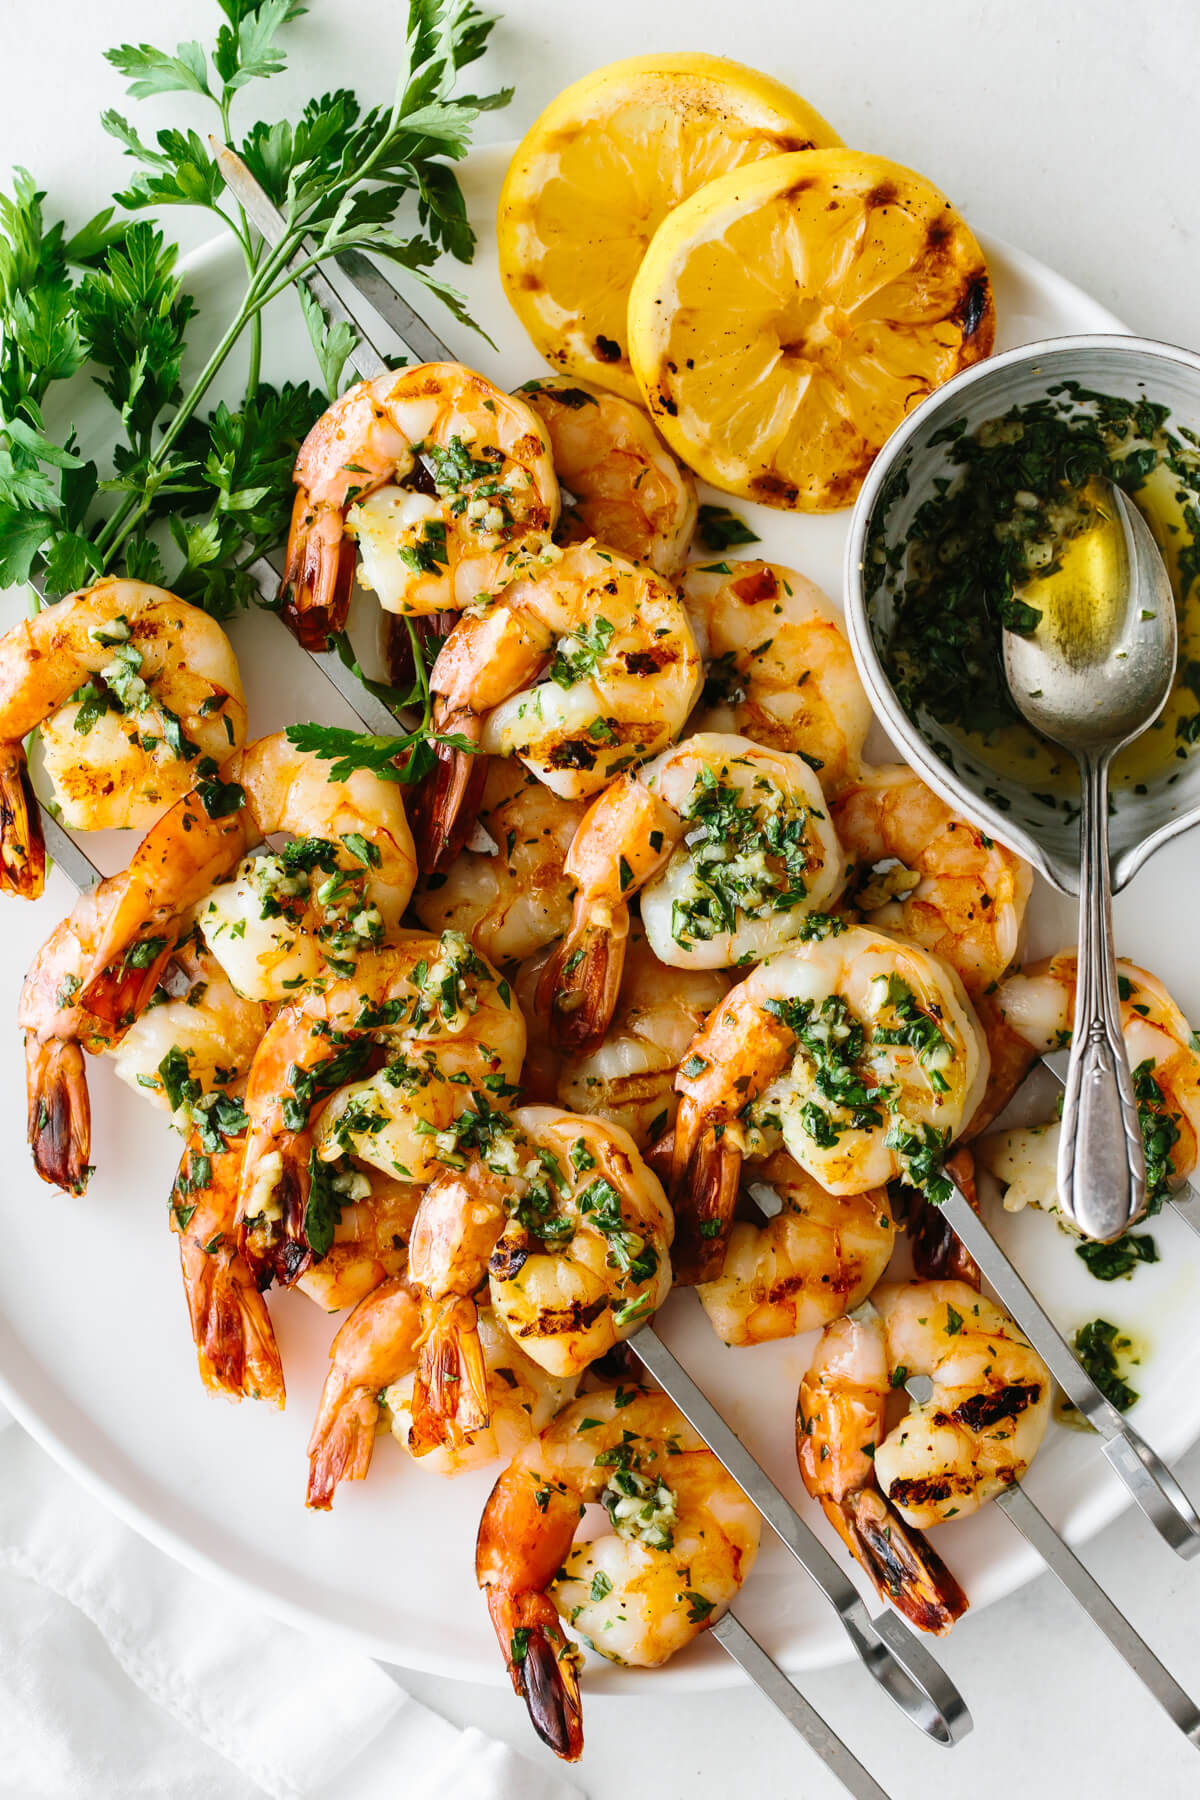 Grilled shrimp skewers on a plate with lemon slices, parsley and the marinade.